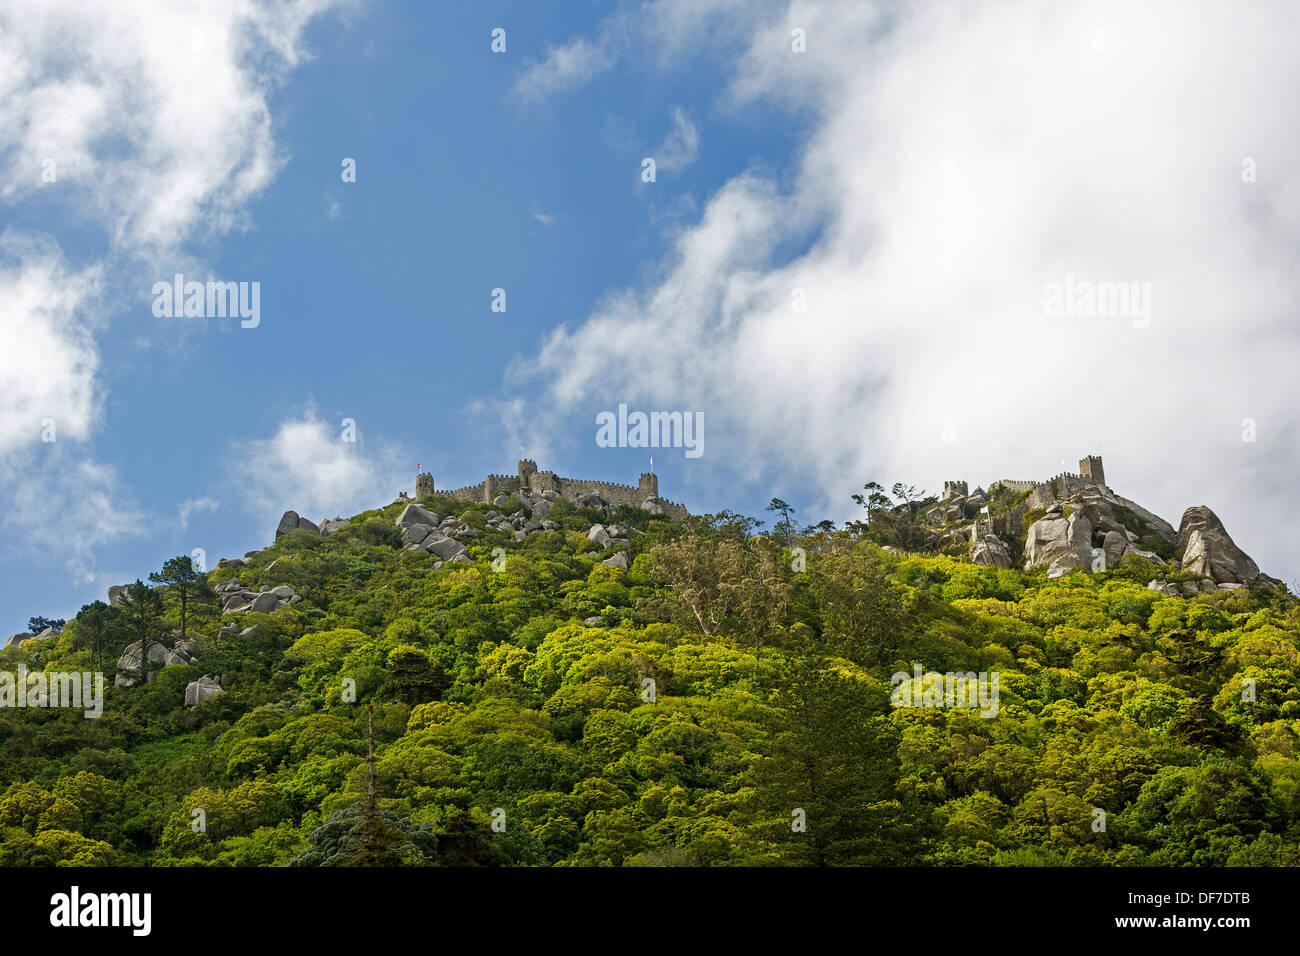 Castelo dos Mouros, Castle of the Moors, Moorish fortress, Sintra, Lisbon District, Portugal Stock Photo